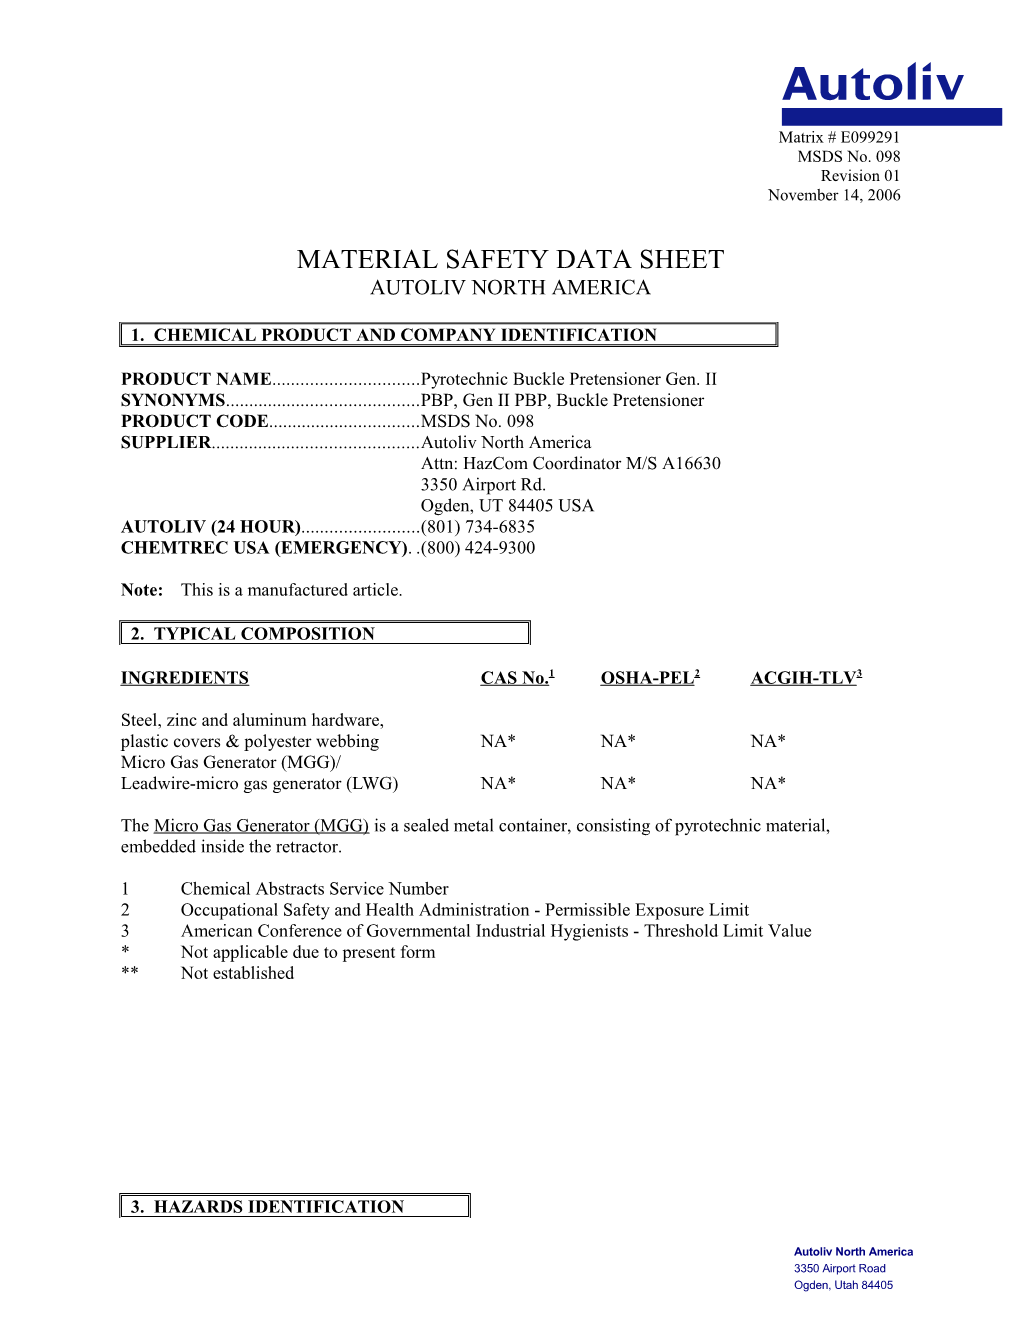 Material Safety Data Sheet s96